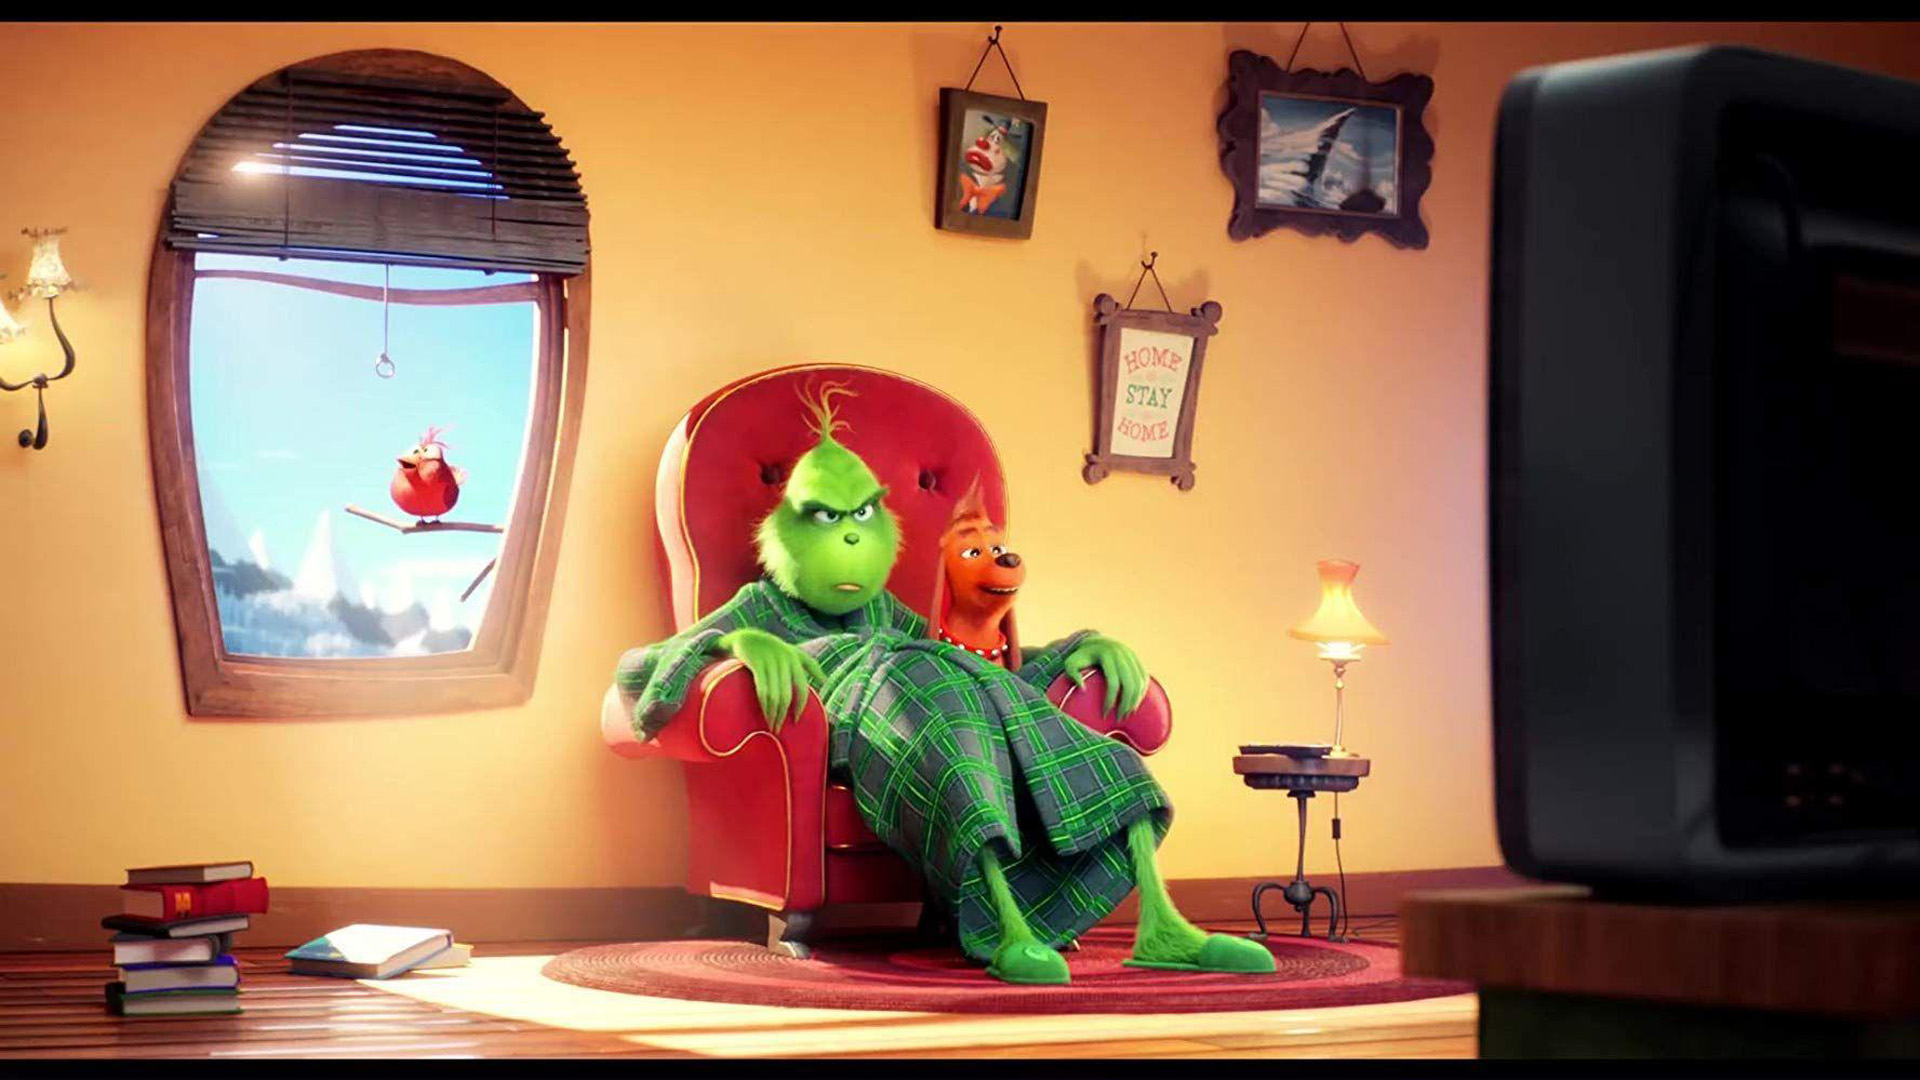 The Grinch Is Sitting On Chair In House 2K The Grinch